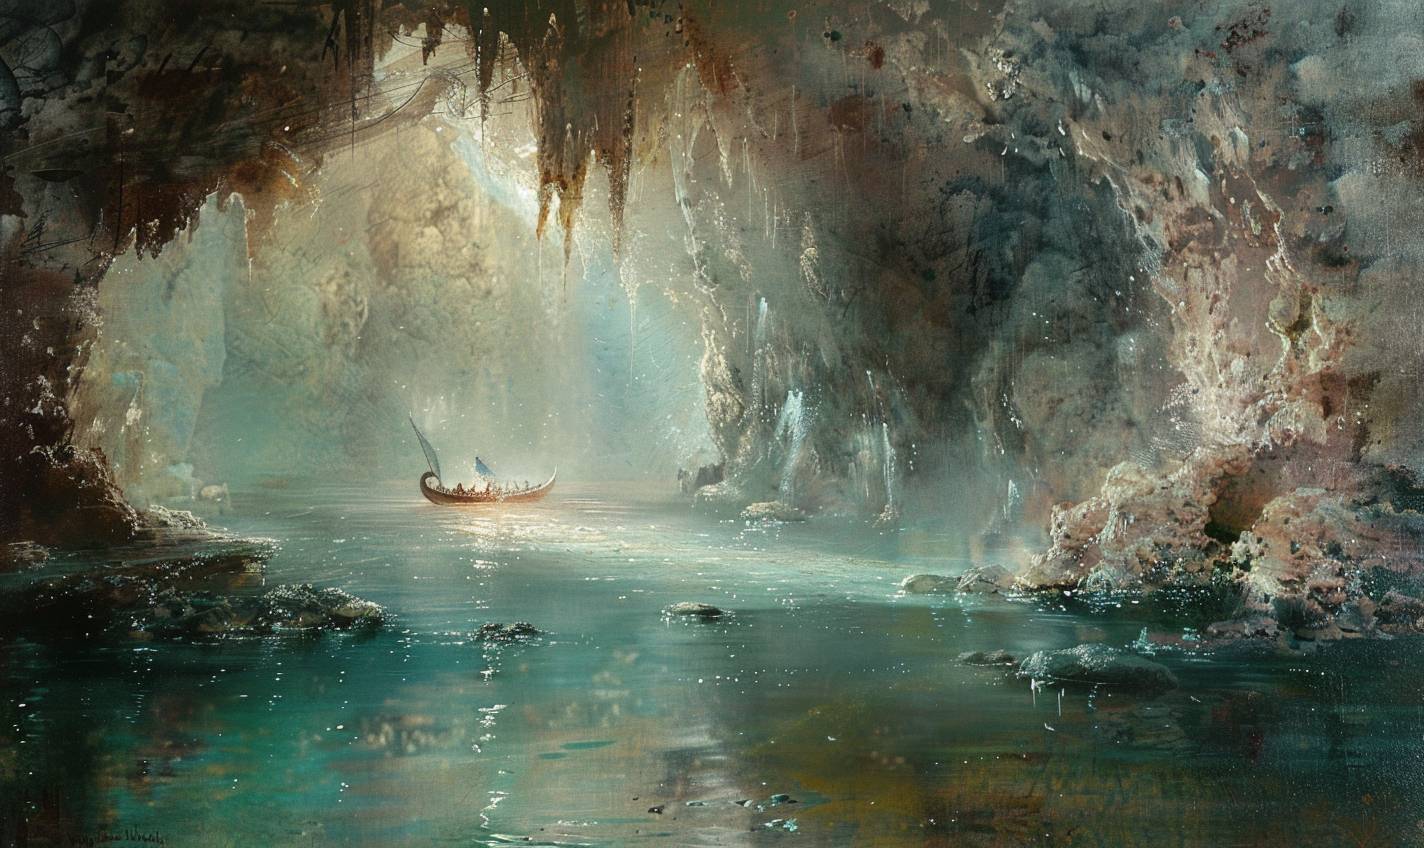 In style of Eugene Galien-Laloue,Underwater grotto with shimmering mermaids